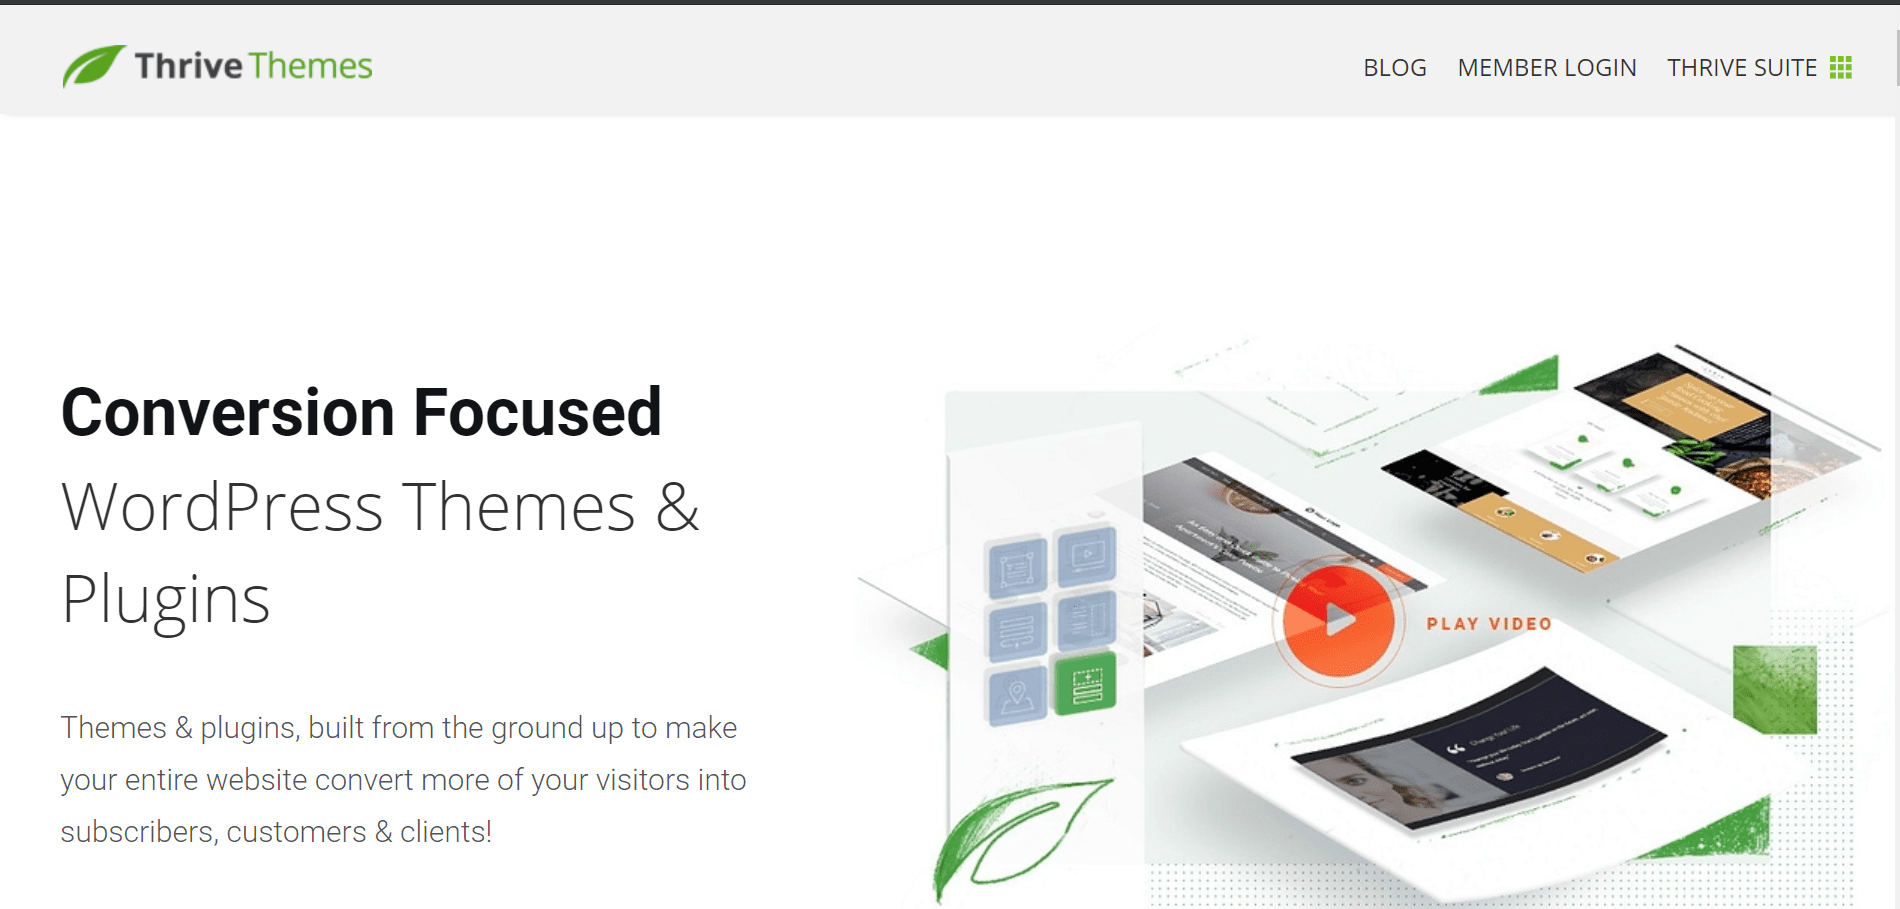 thrivethemes-overview